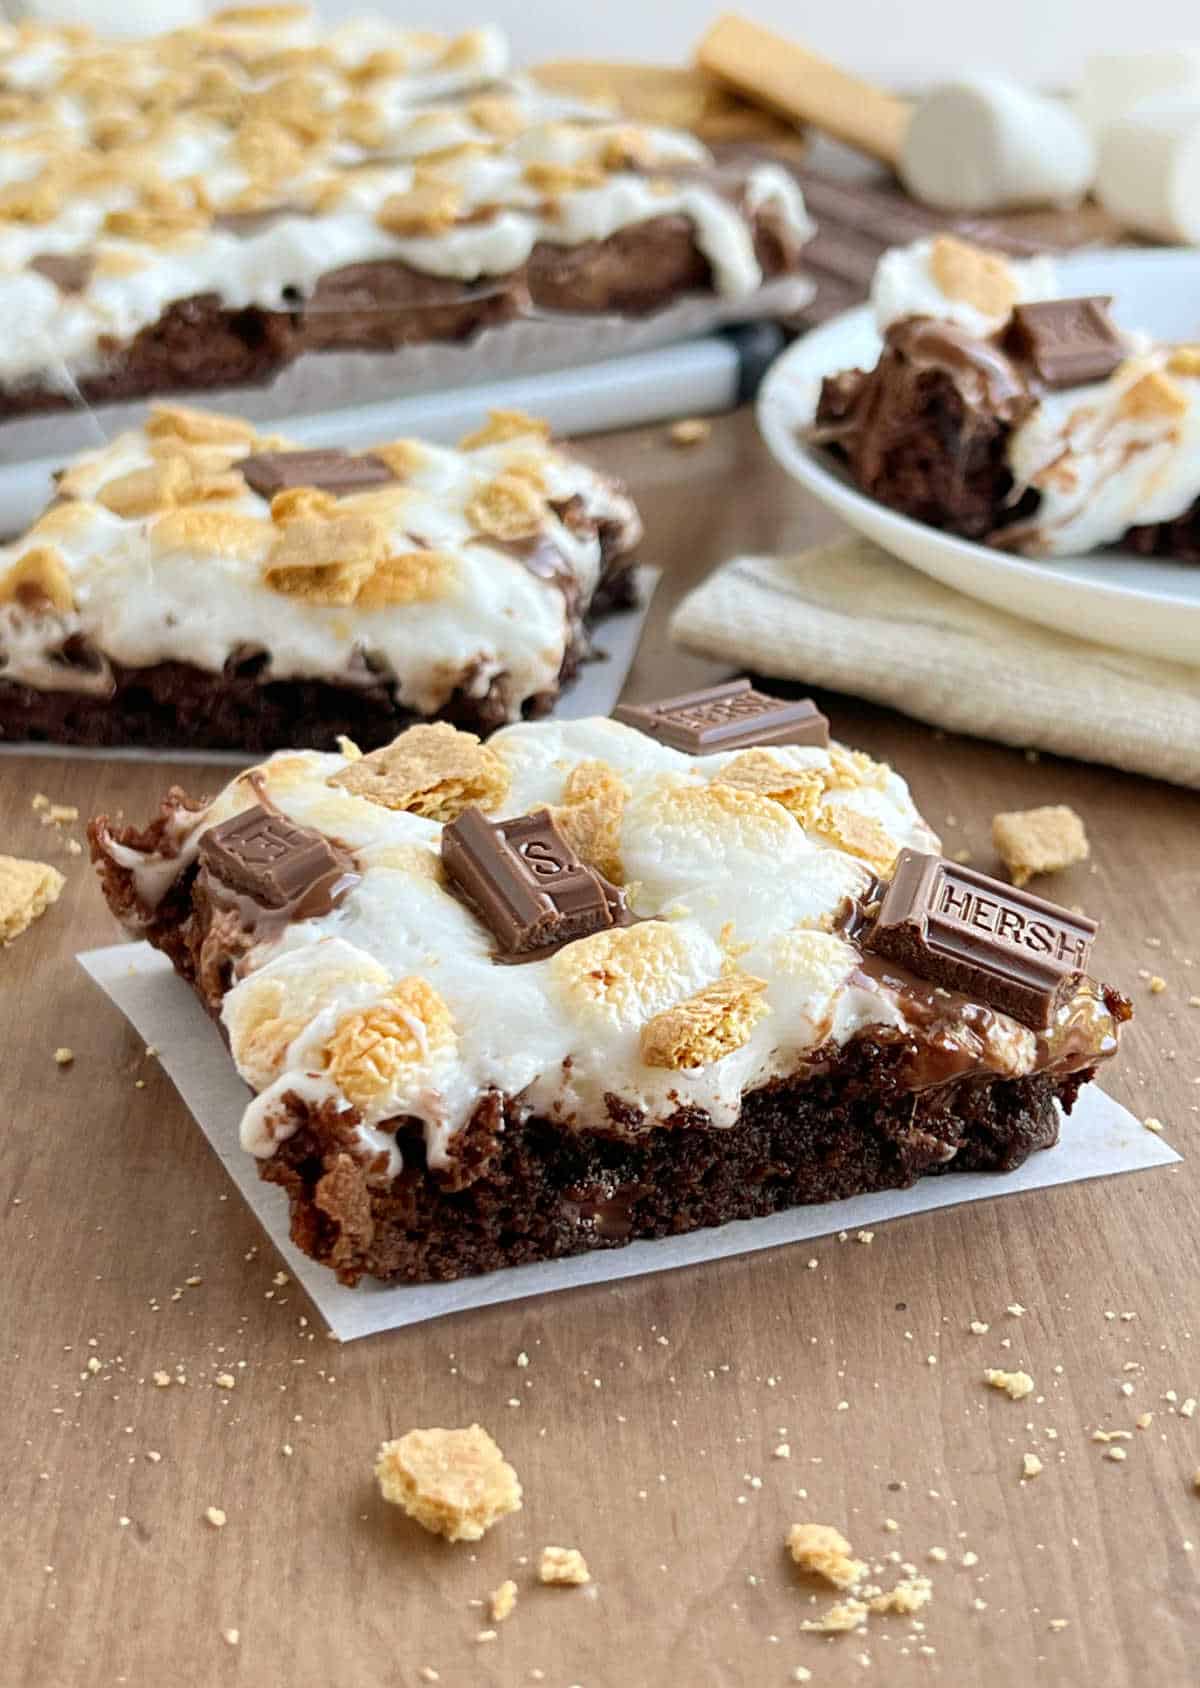 smores brownie with graham cracker crumbs, chocolate pieces and gooey marshmallow topping.